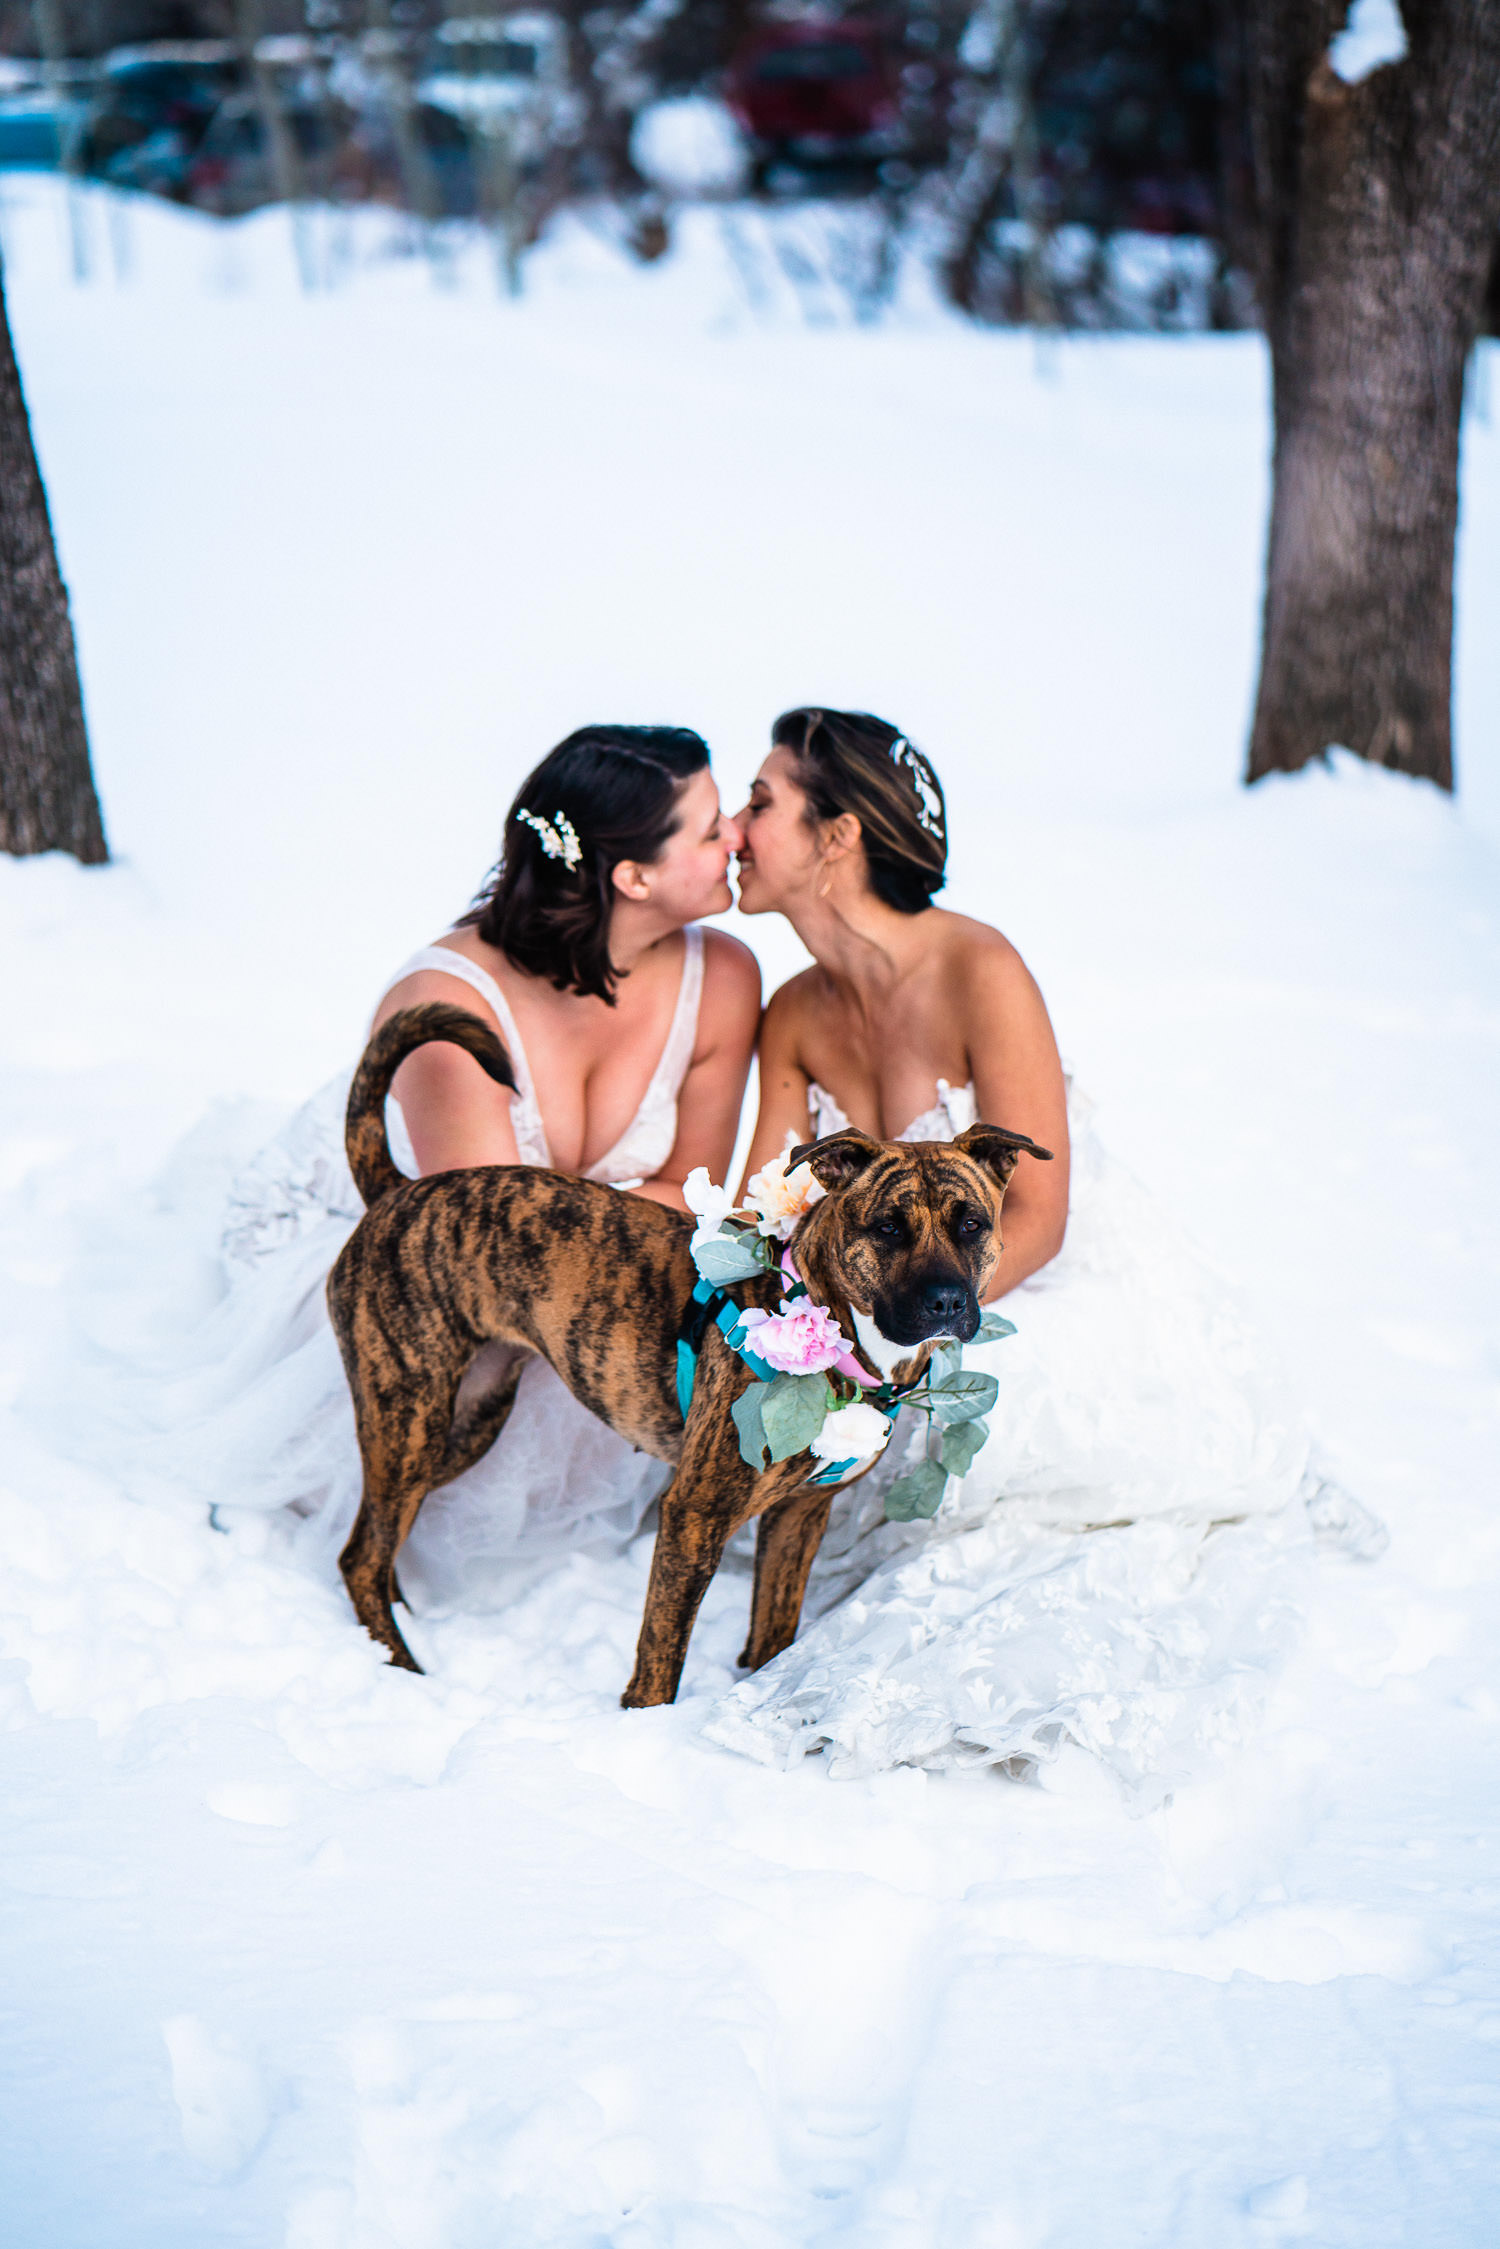 Two brides and their dog in a snowy forrest